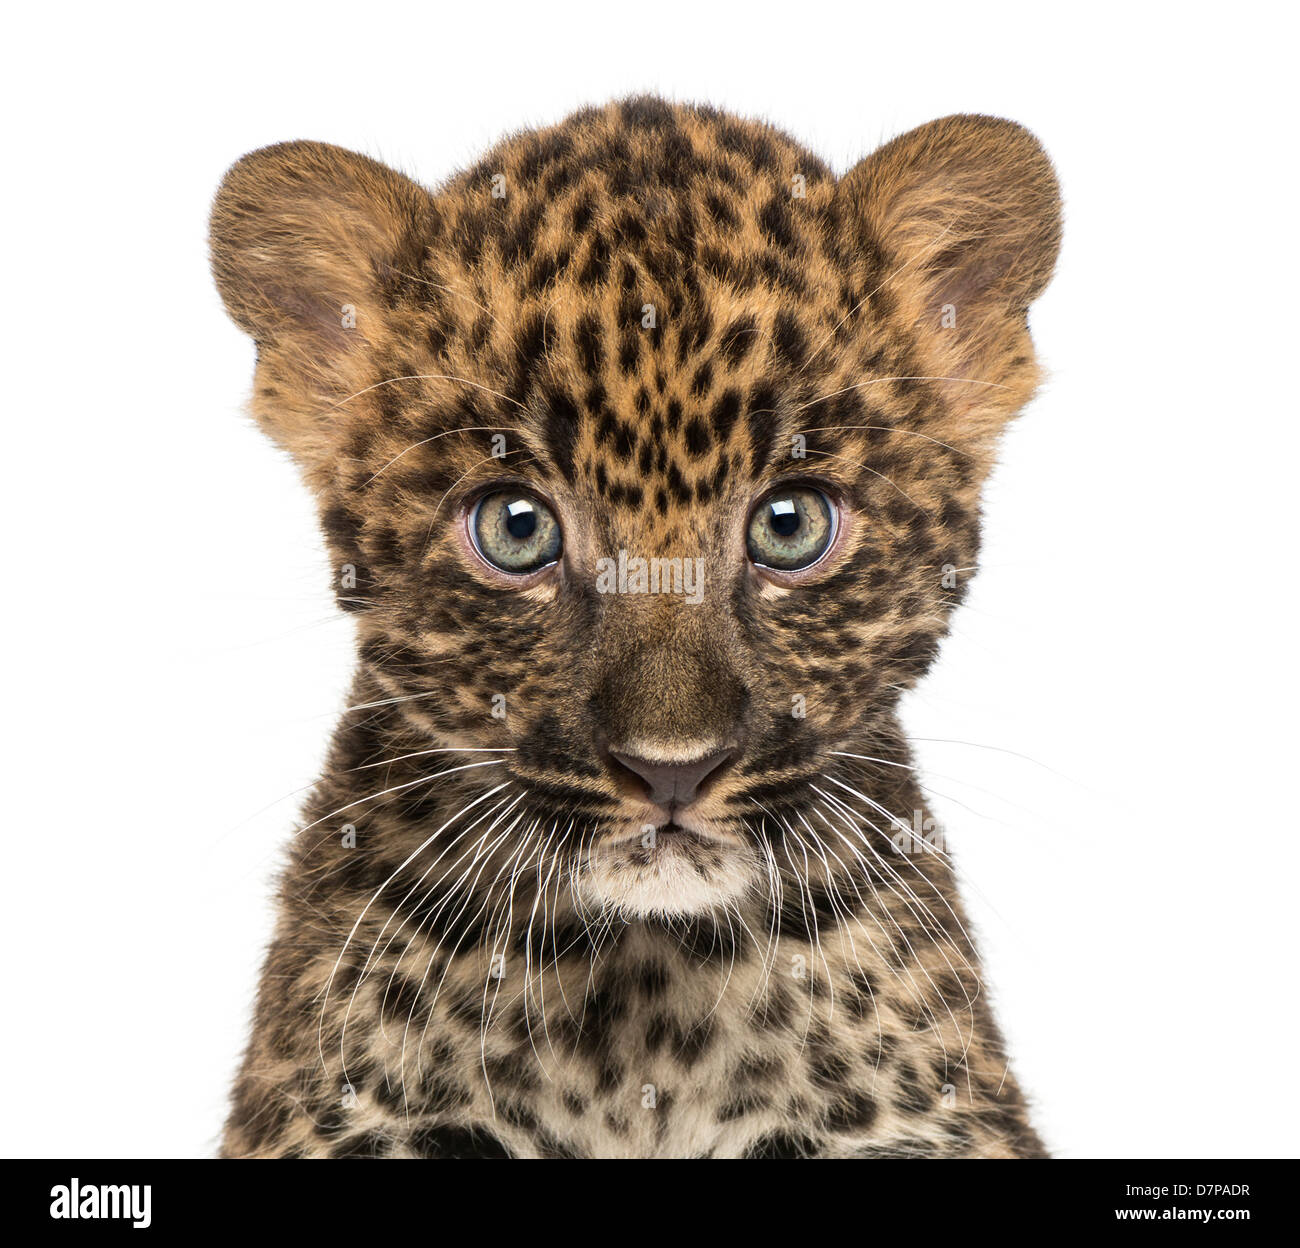 Spotted Leopard cub, Panthera pardus, 7 weeks old, portrait against white background Stock Photo